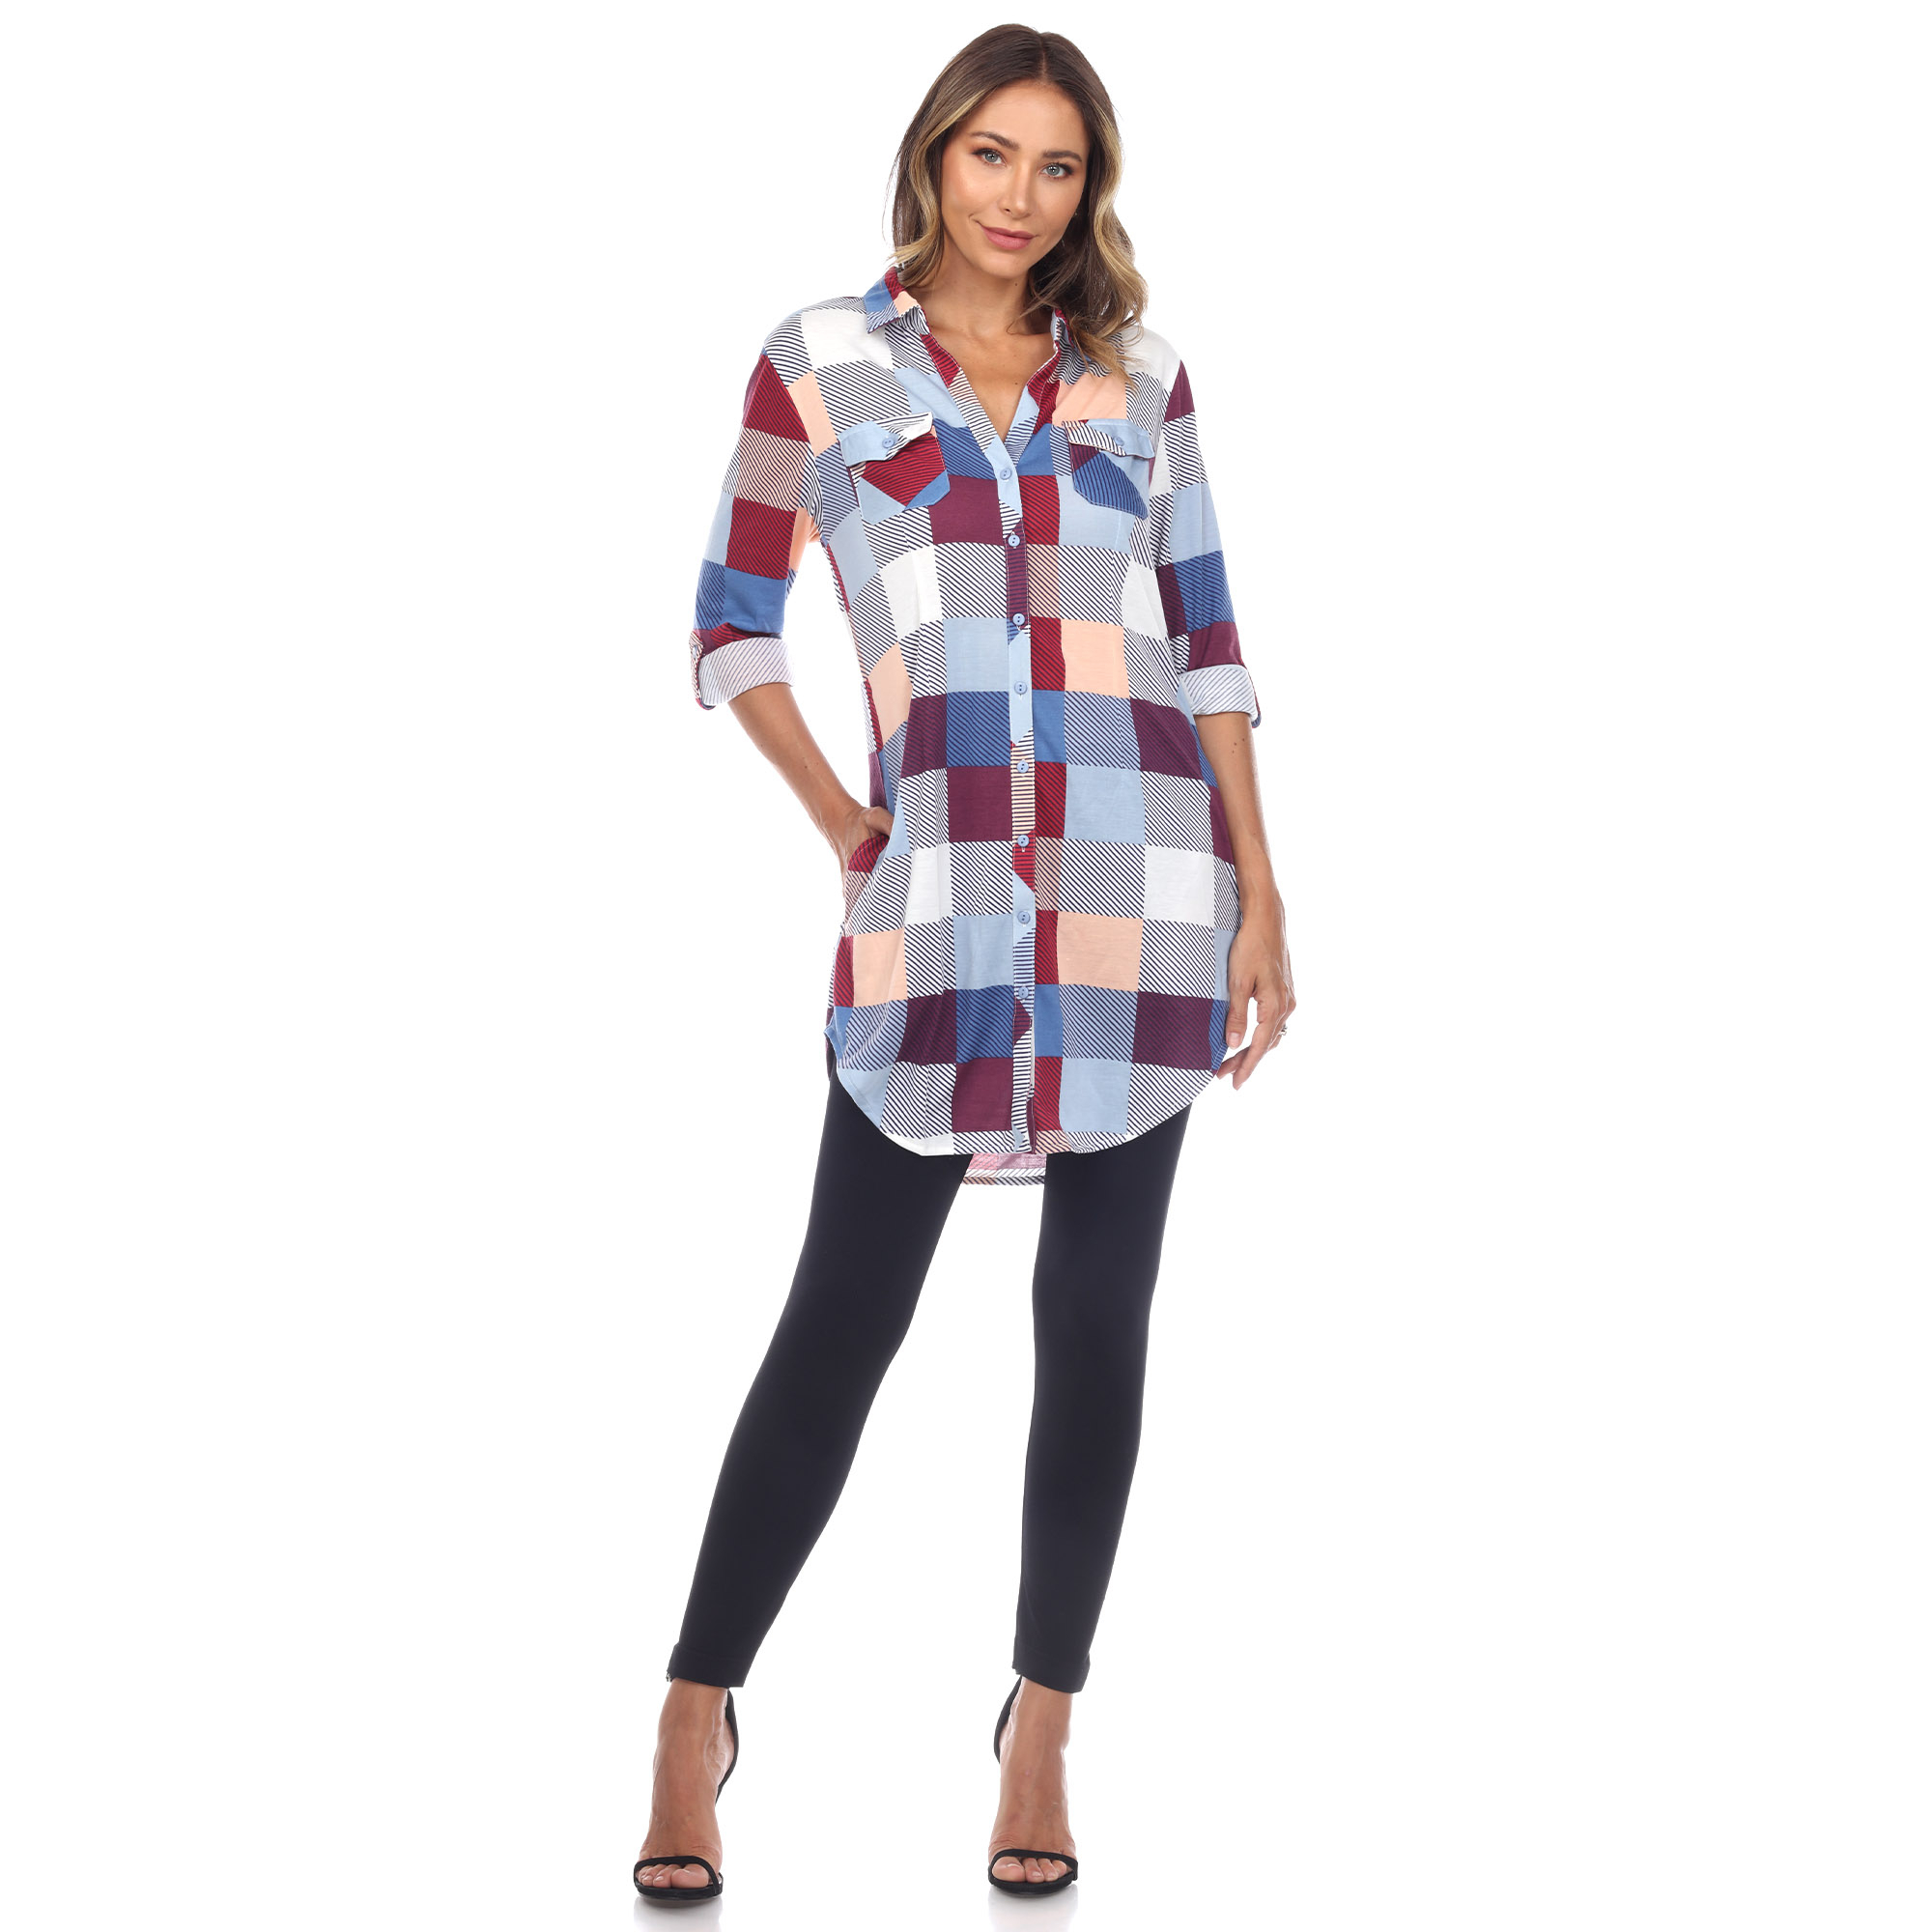 White Mark Women's Stretchy Buffalo Plaid Tunic Top - Red/Black, Large